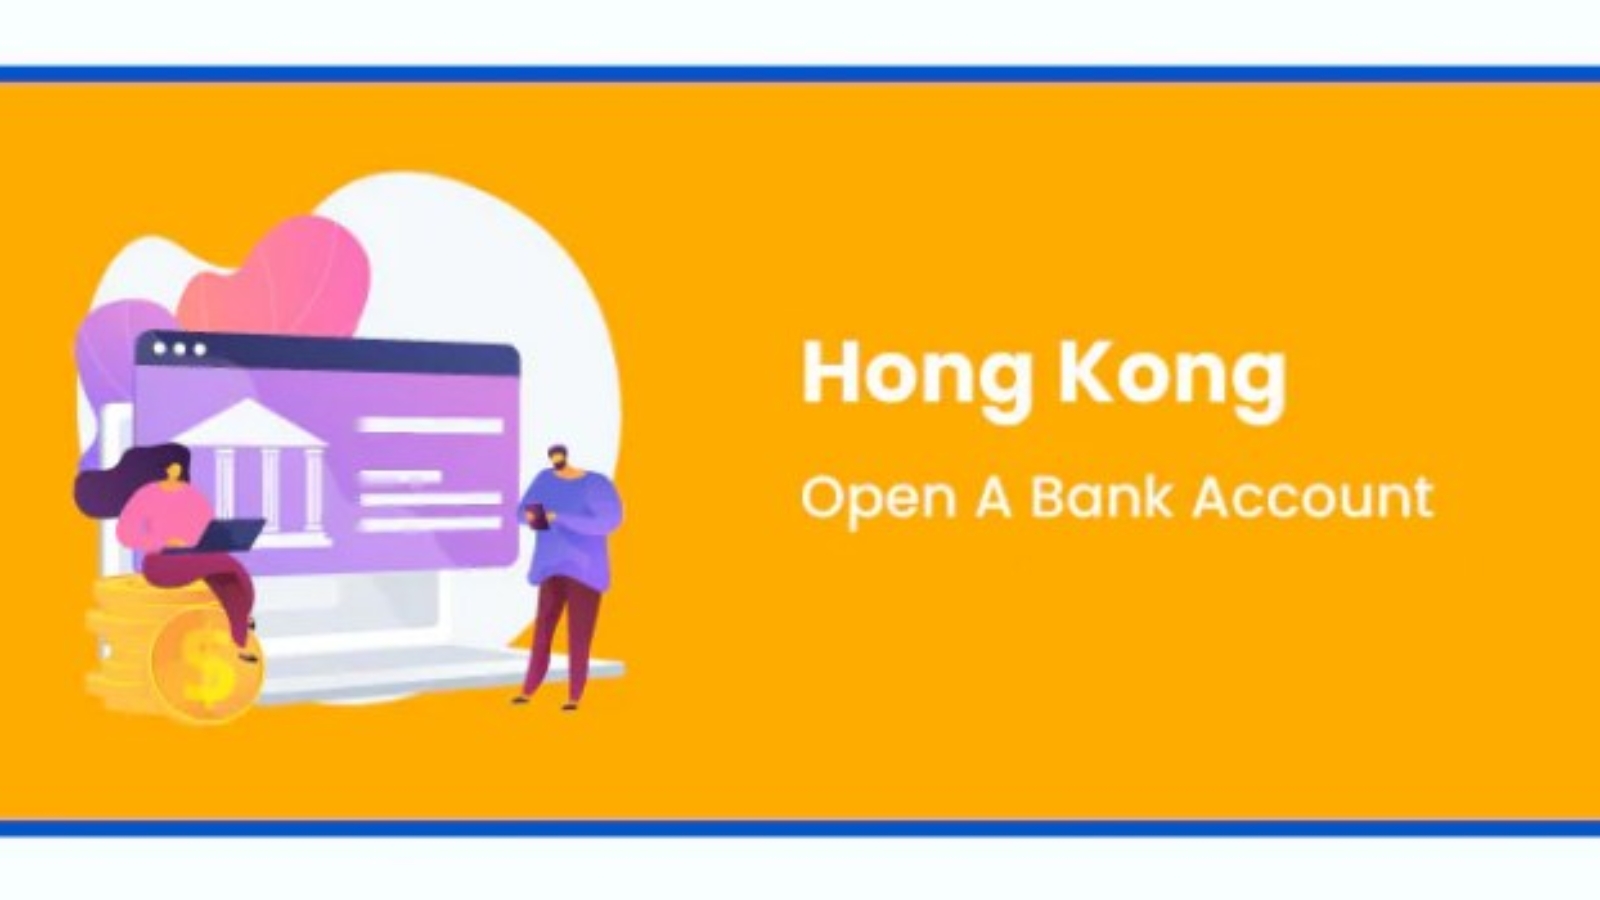 Lead time for opening a bank account in Hong Kong